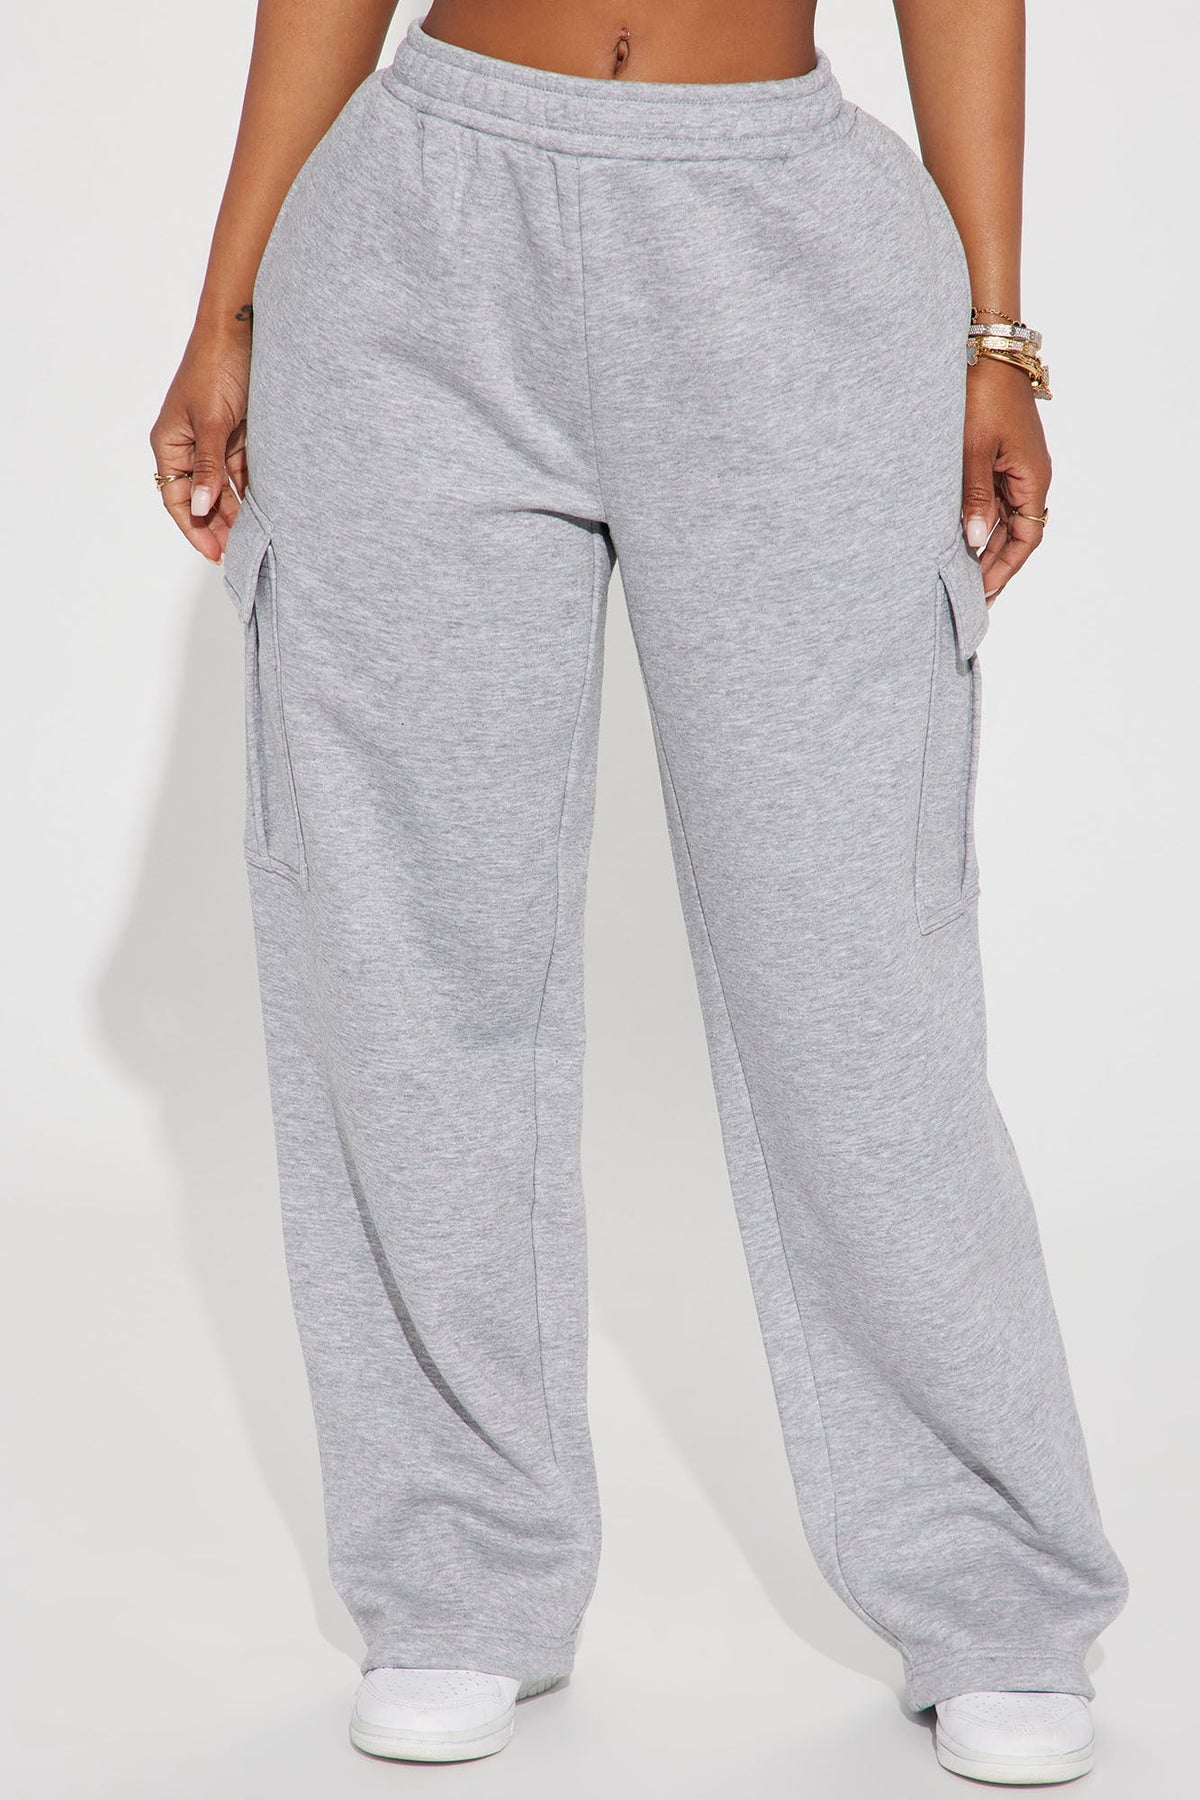 Your Man's Lounge Pant - Heather Grey